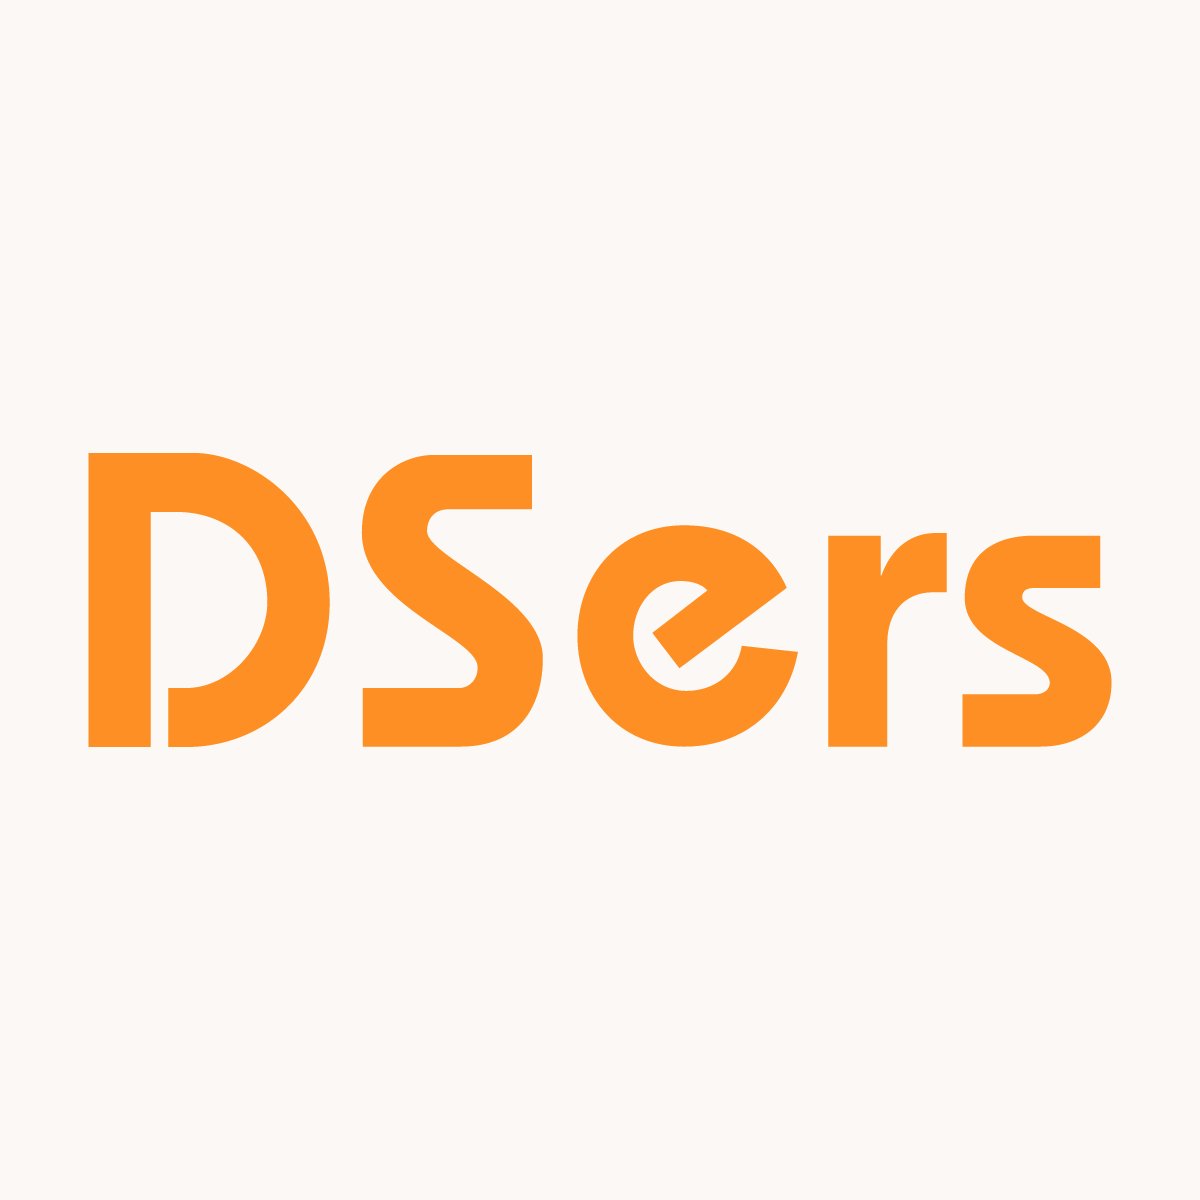 DSers